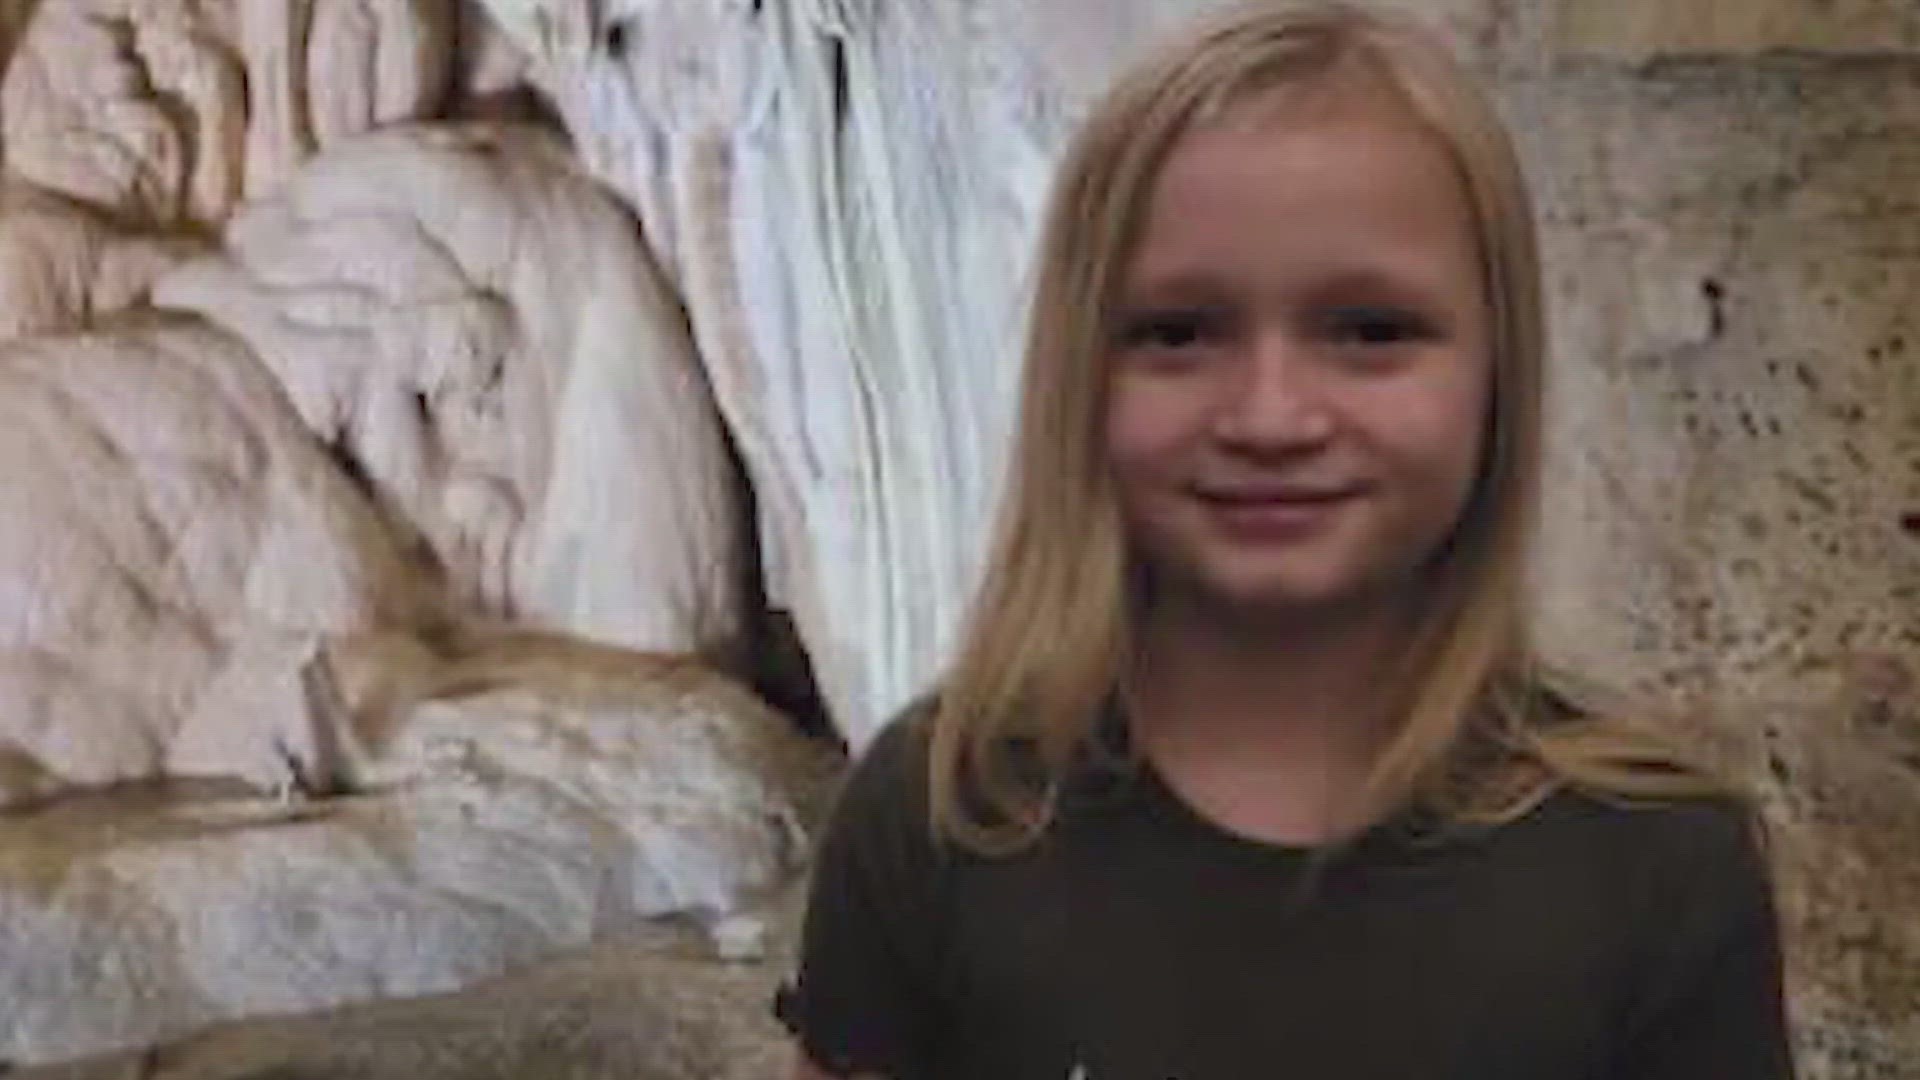 Authorities recovered the 11-year-old's body. She had been missing since Thursday.